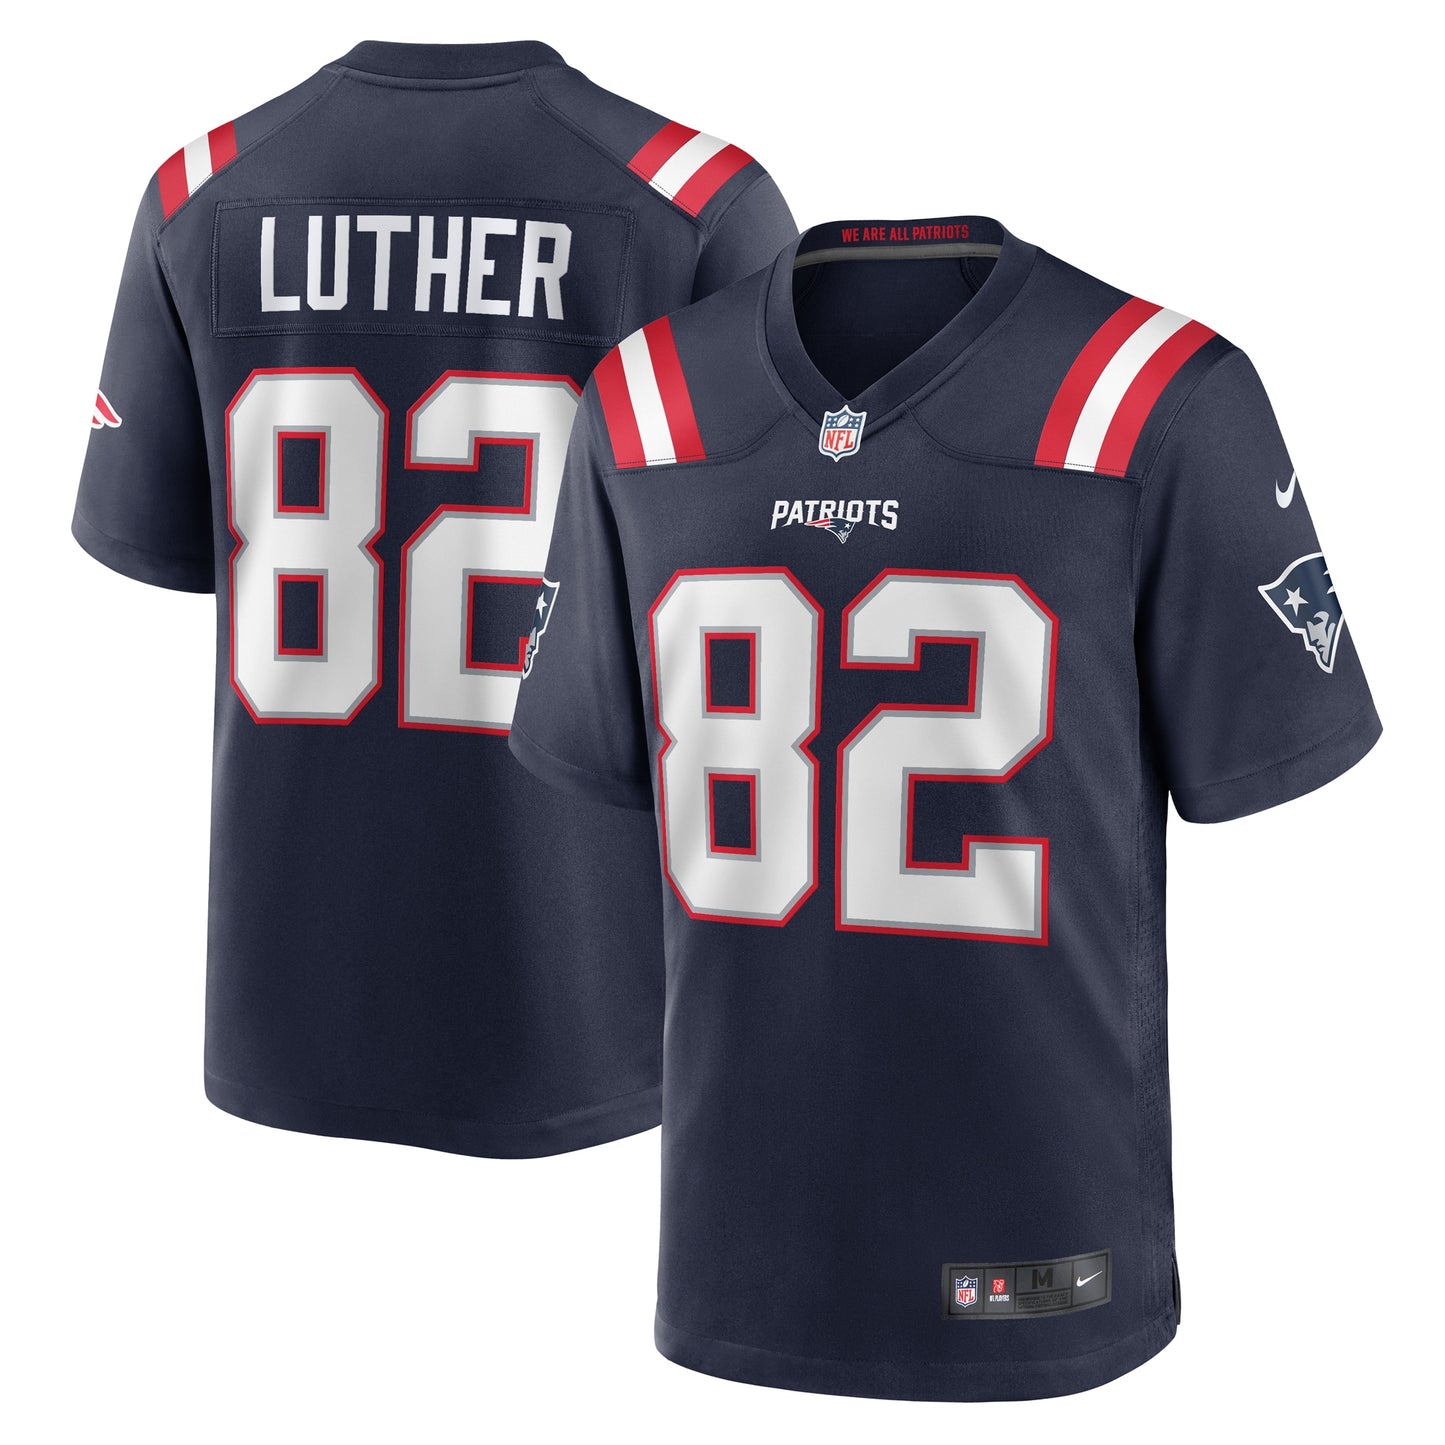 T.J. Luther New England Patriots Nike Team Game Jersey - Navy